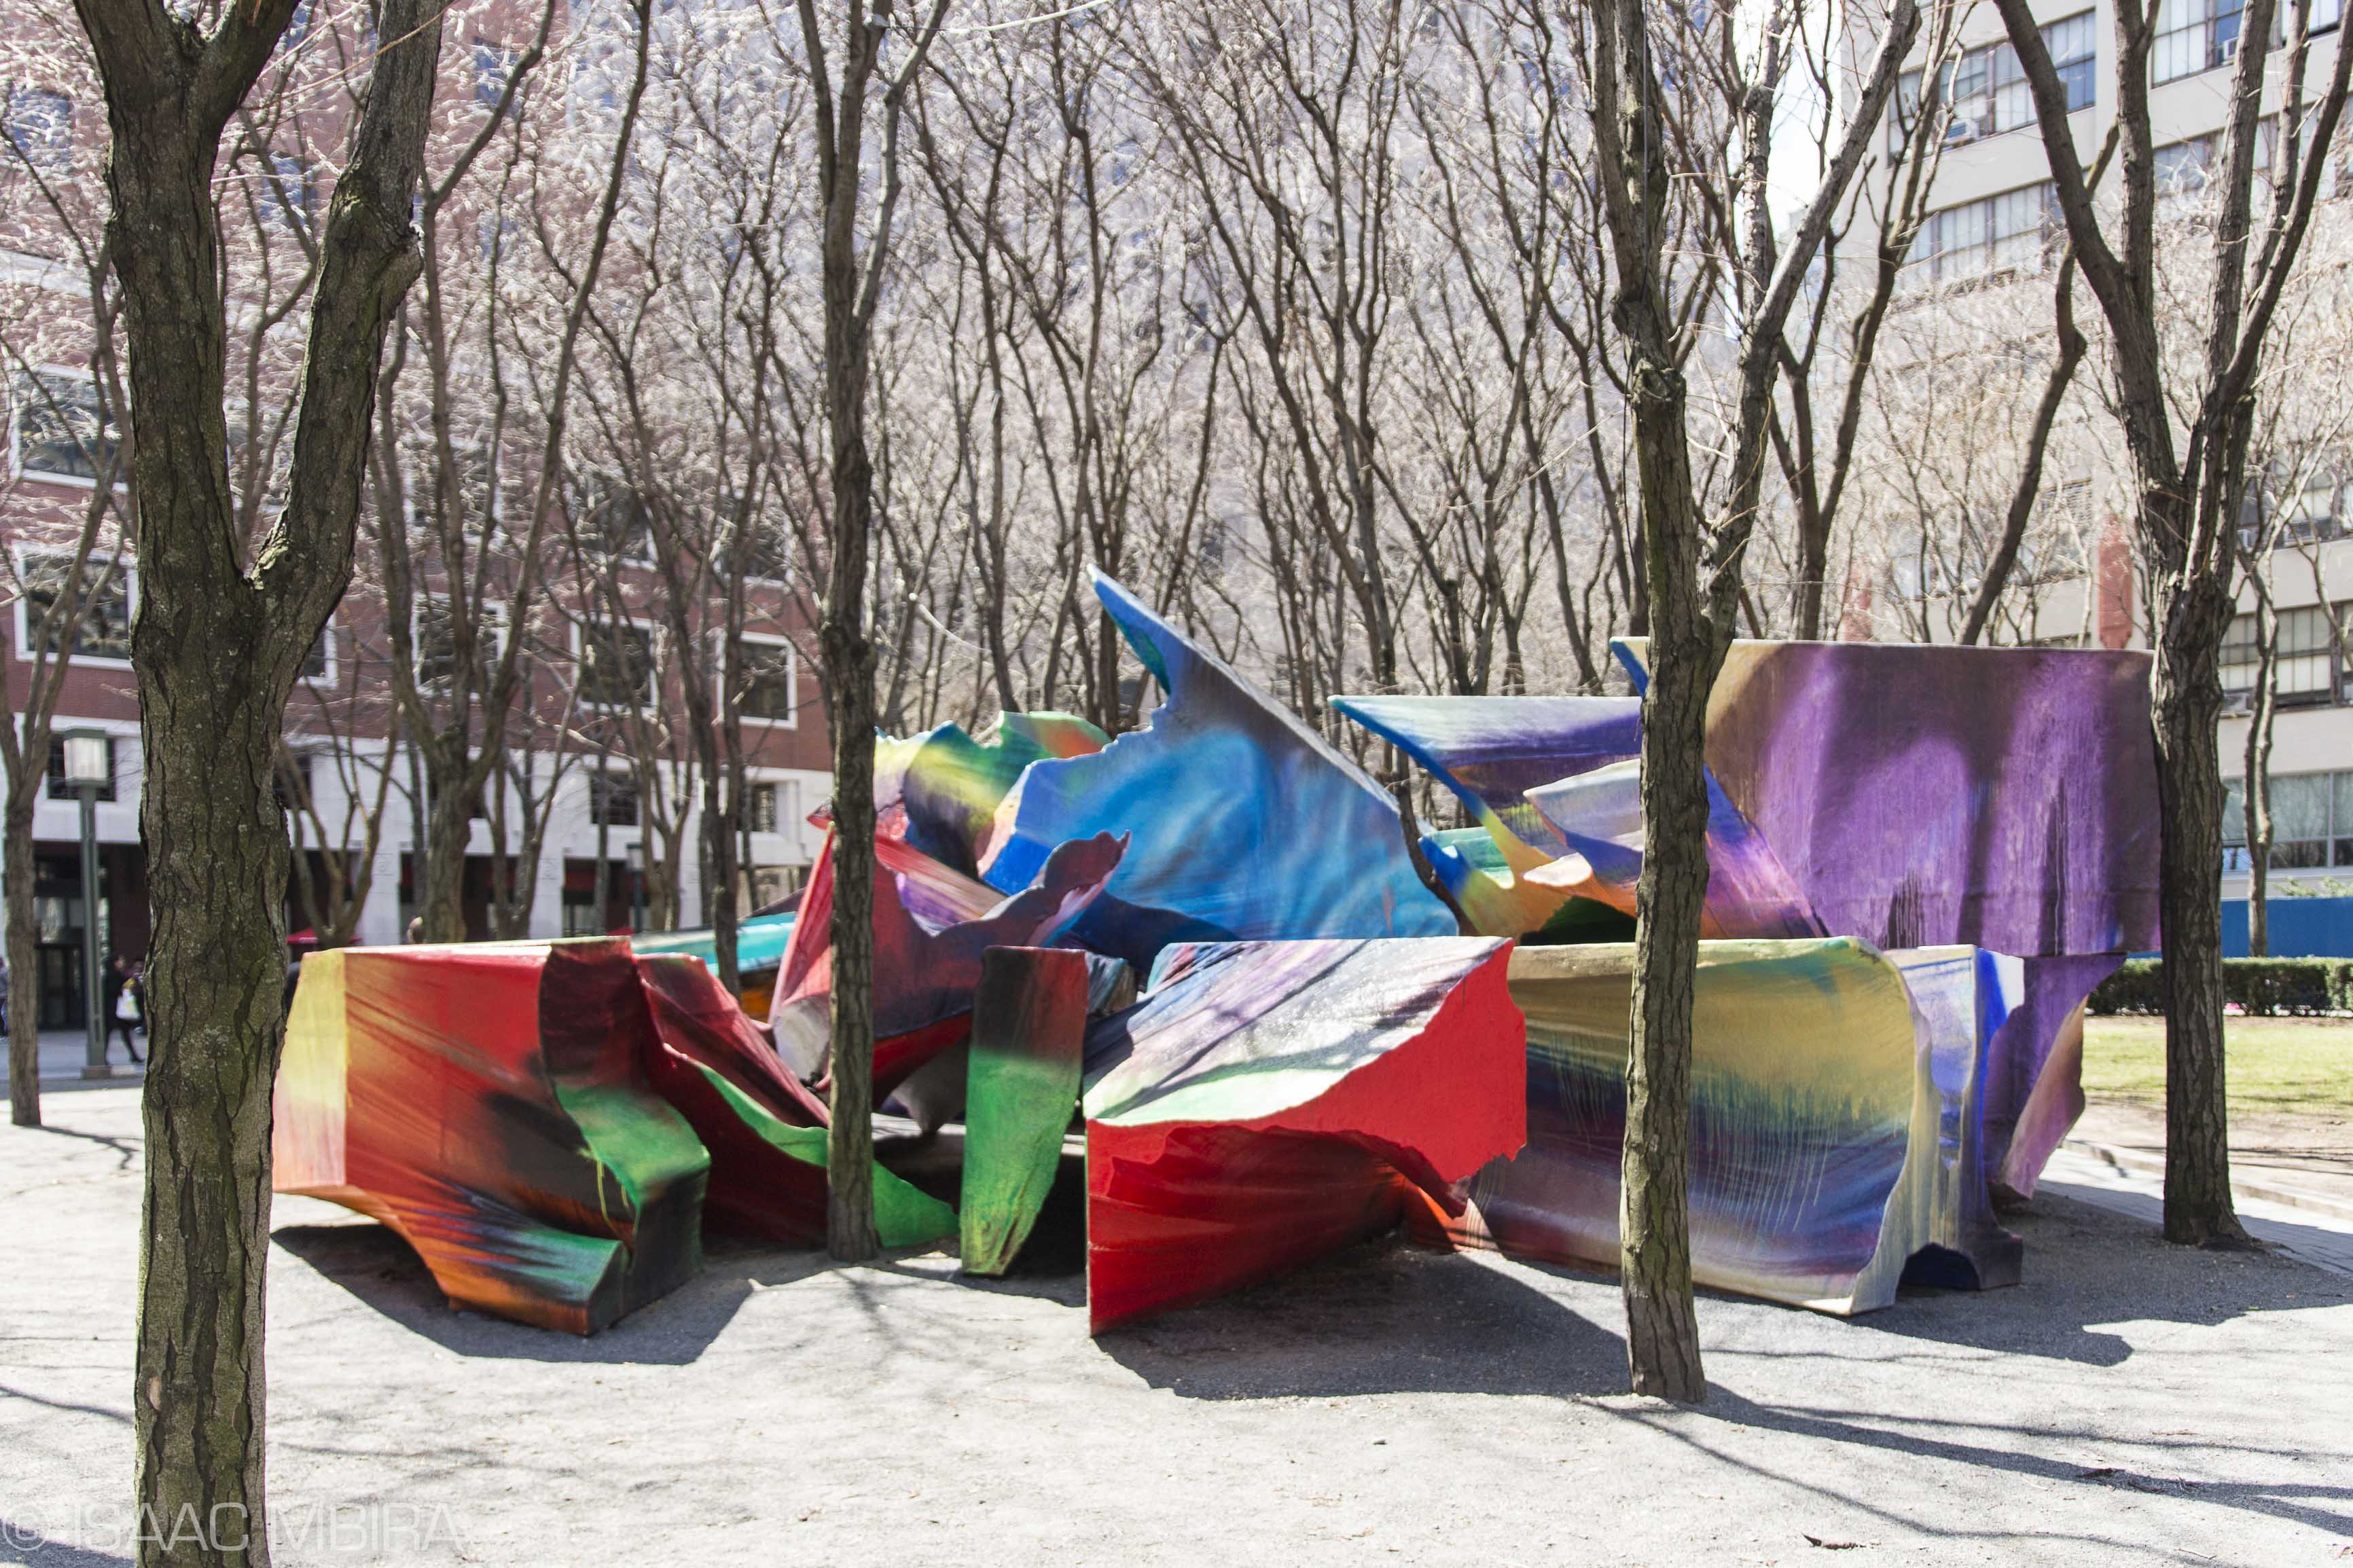 Image of art installation at the MetroTech Center